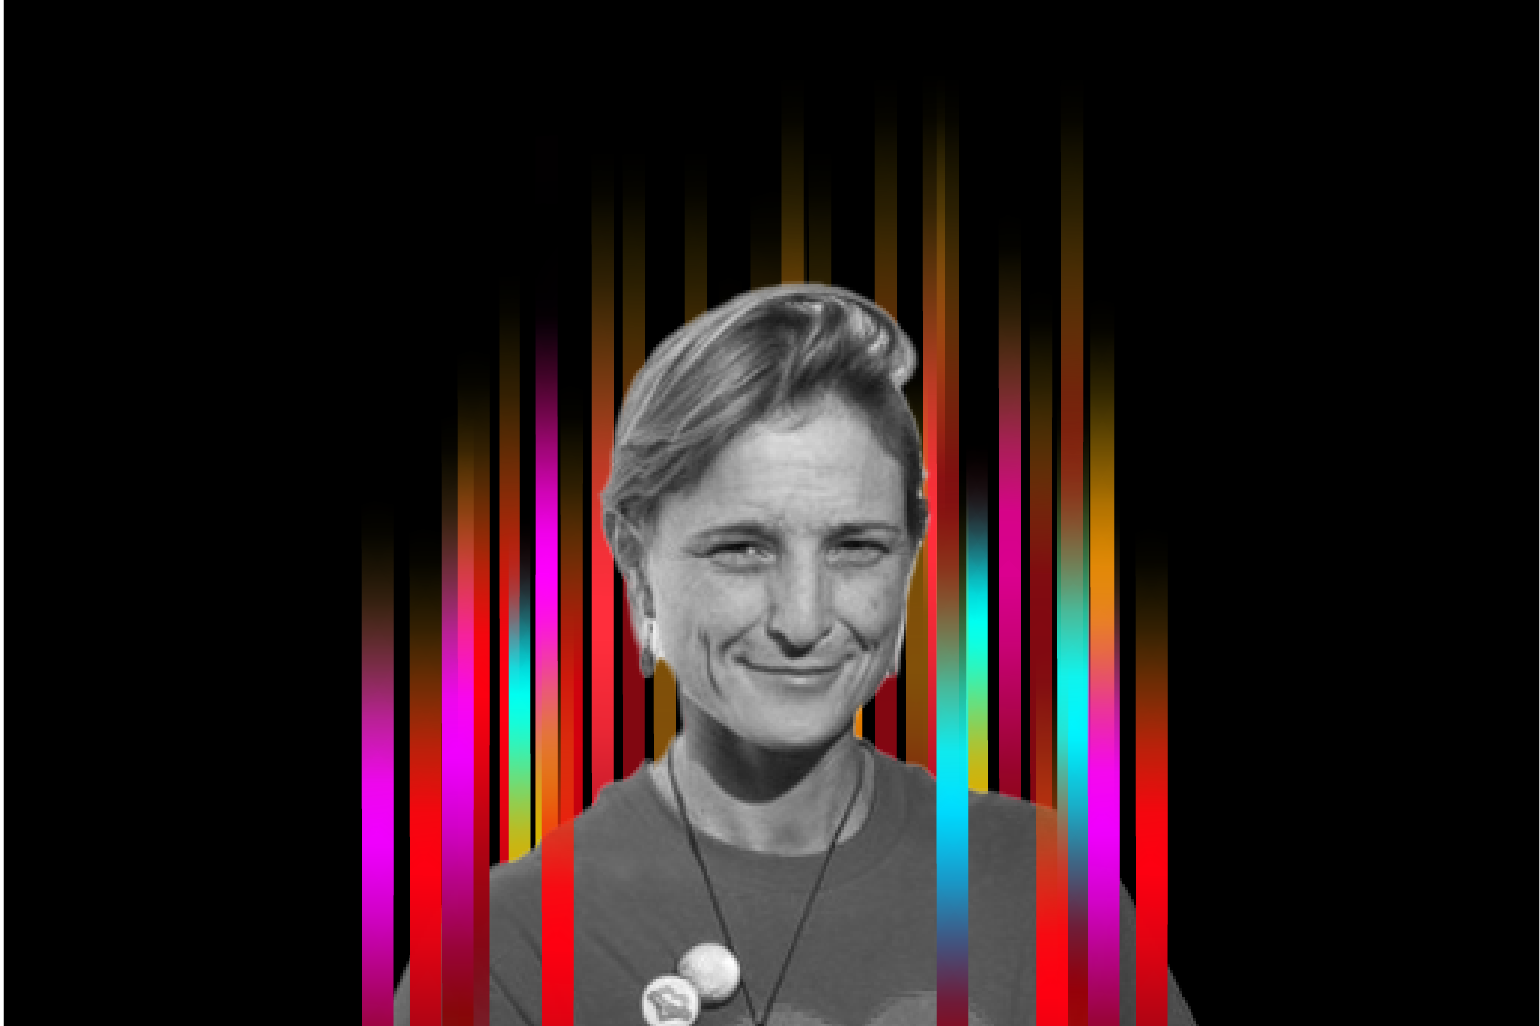 On the middle of a black background is a row of colourful vertical stripes’. In the centre is a black and white profile photo of TEDx speaker Sophie Lodge superimposed on top.